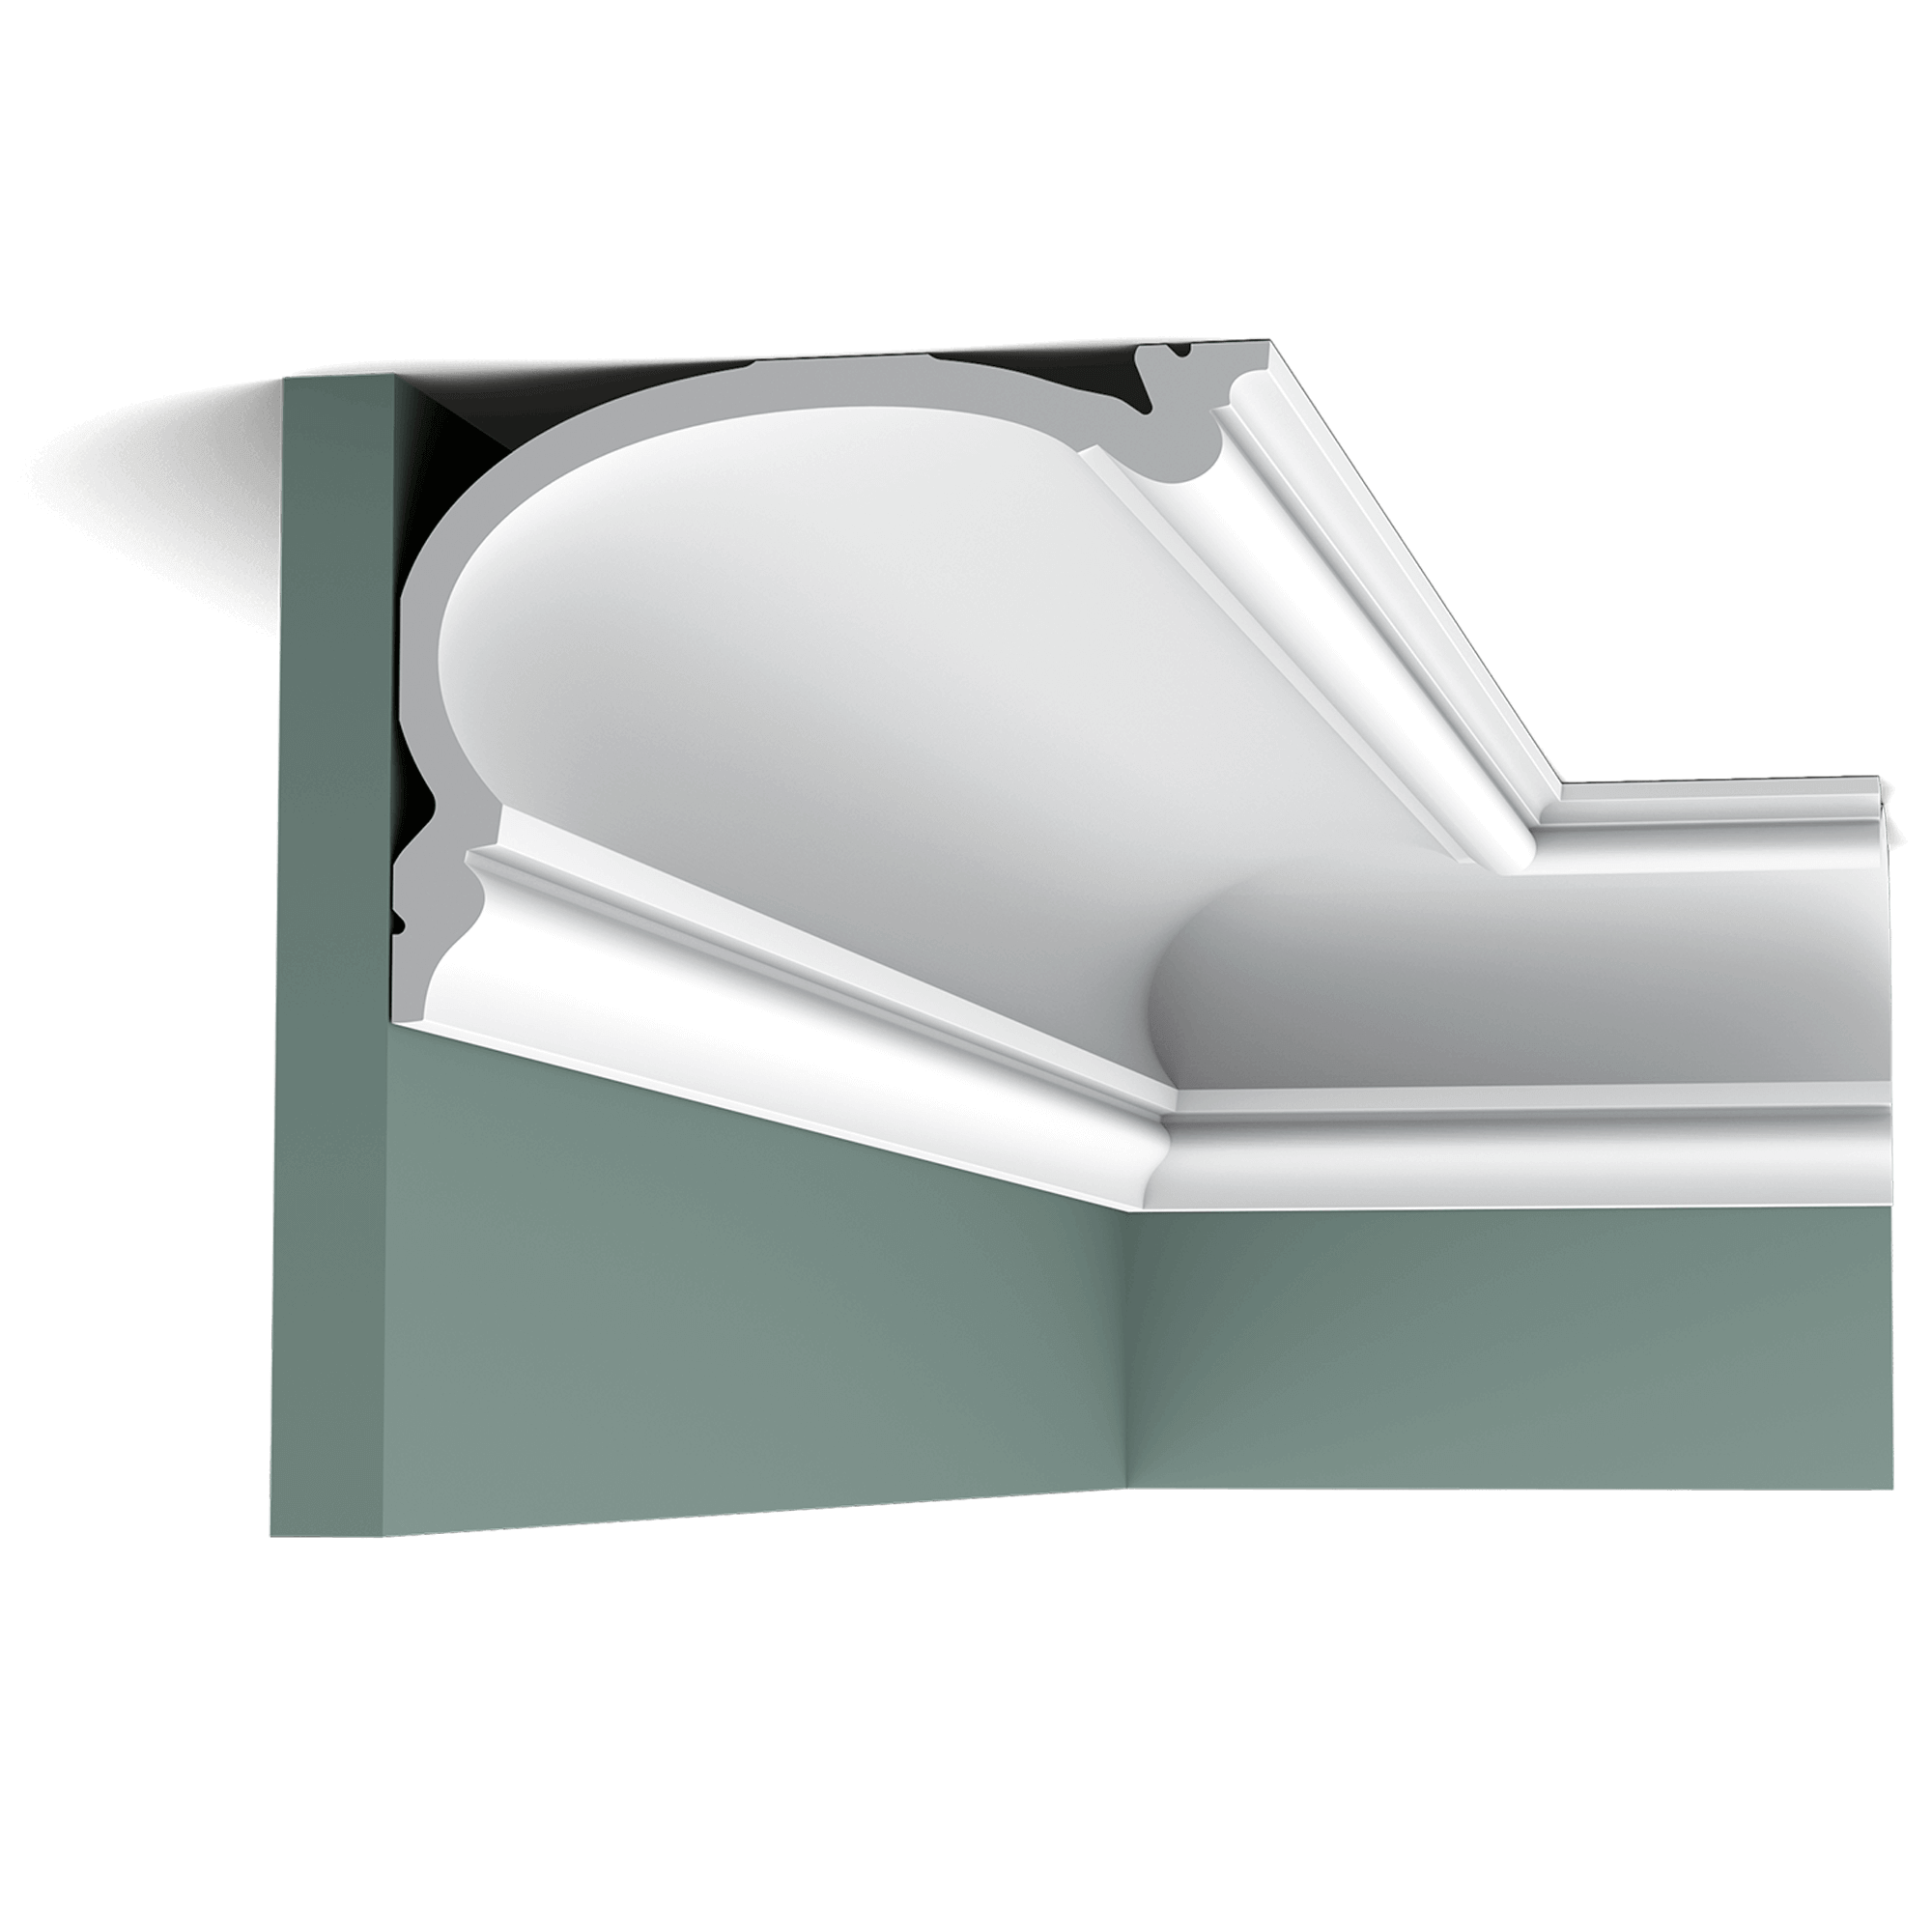 c342 cornice moulding e270 Second in line in the HERITAGE family. A stately classic cornice moulding inspired by the rich heritage of English country homes. Installation remark: It is necessary to screw this profile on the wall.